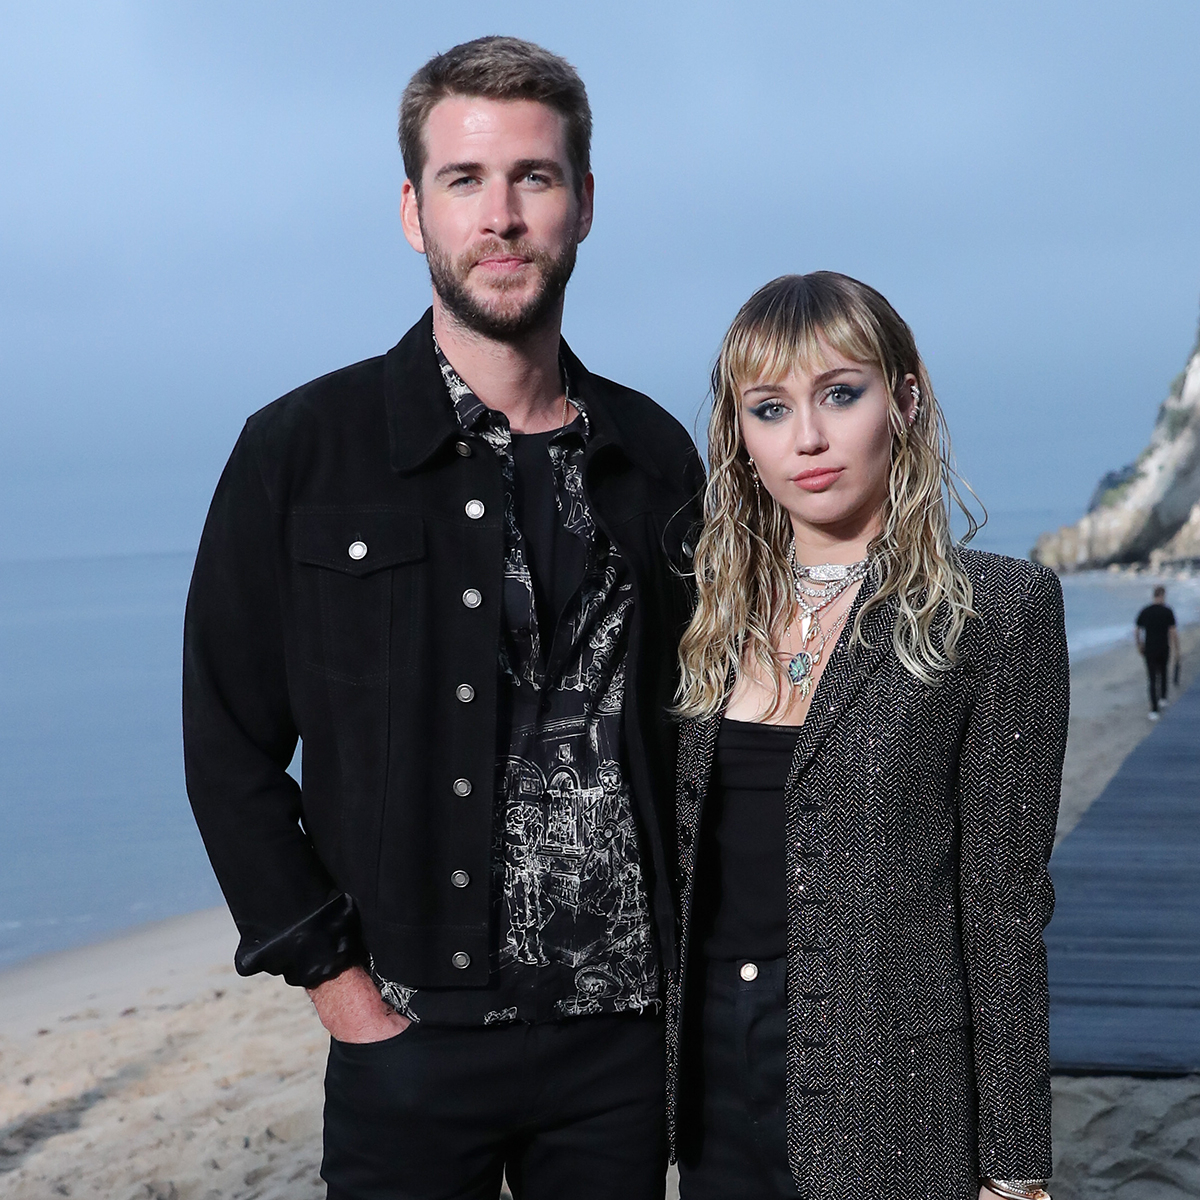 Why Miley Cyrus Wouldn’t Erase Her and Liam Hemsworth’s Relationship